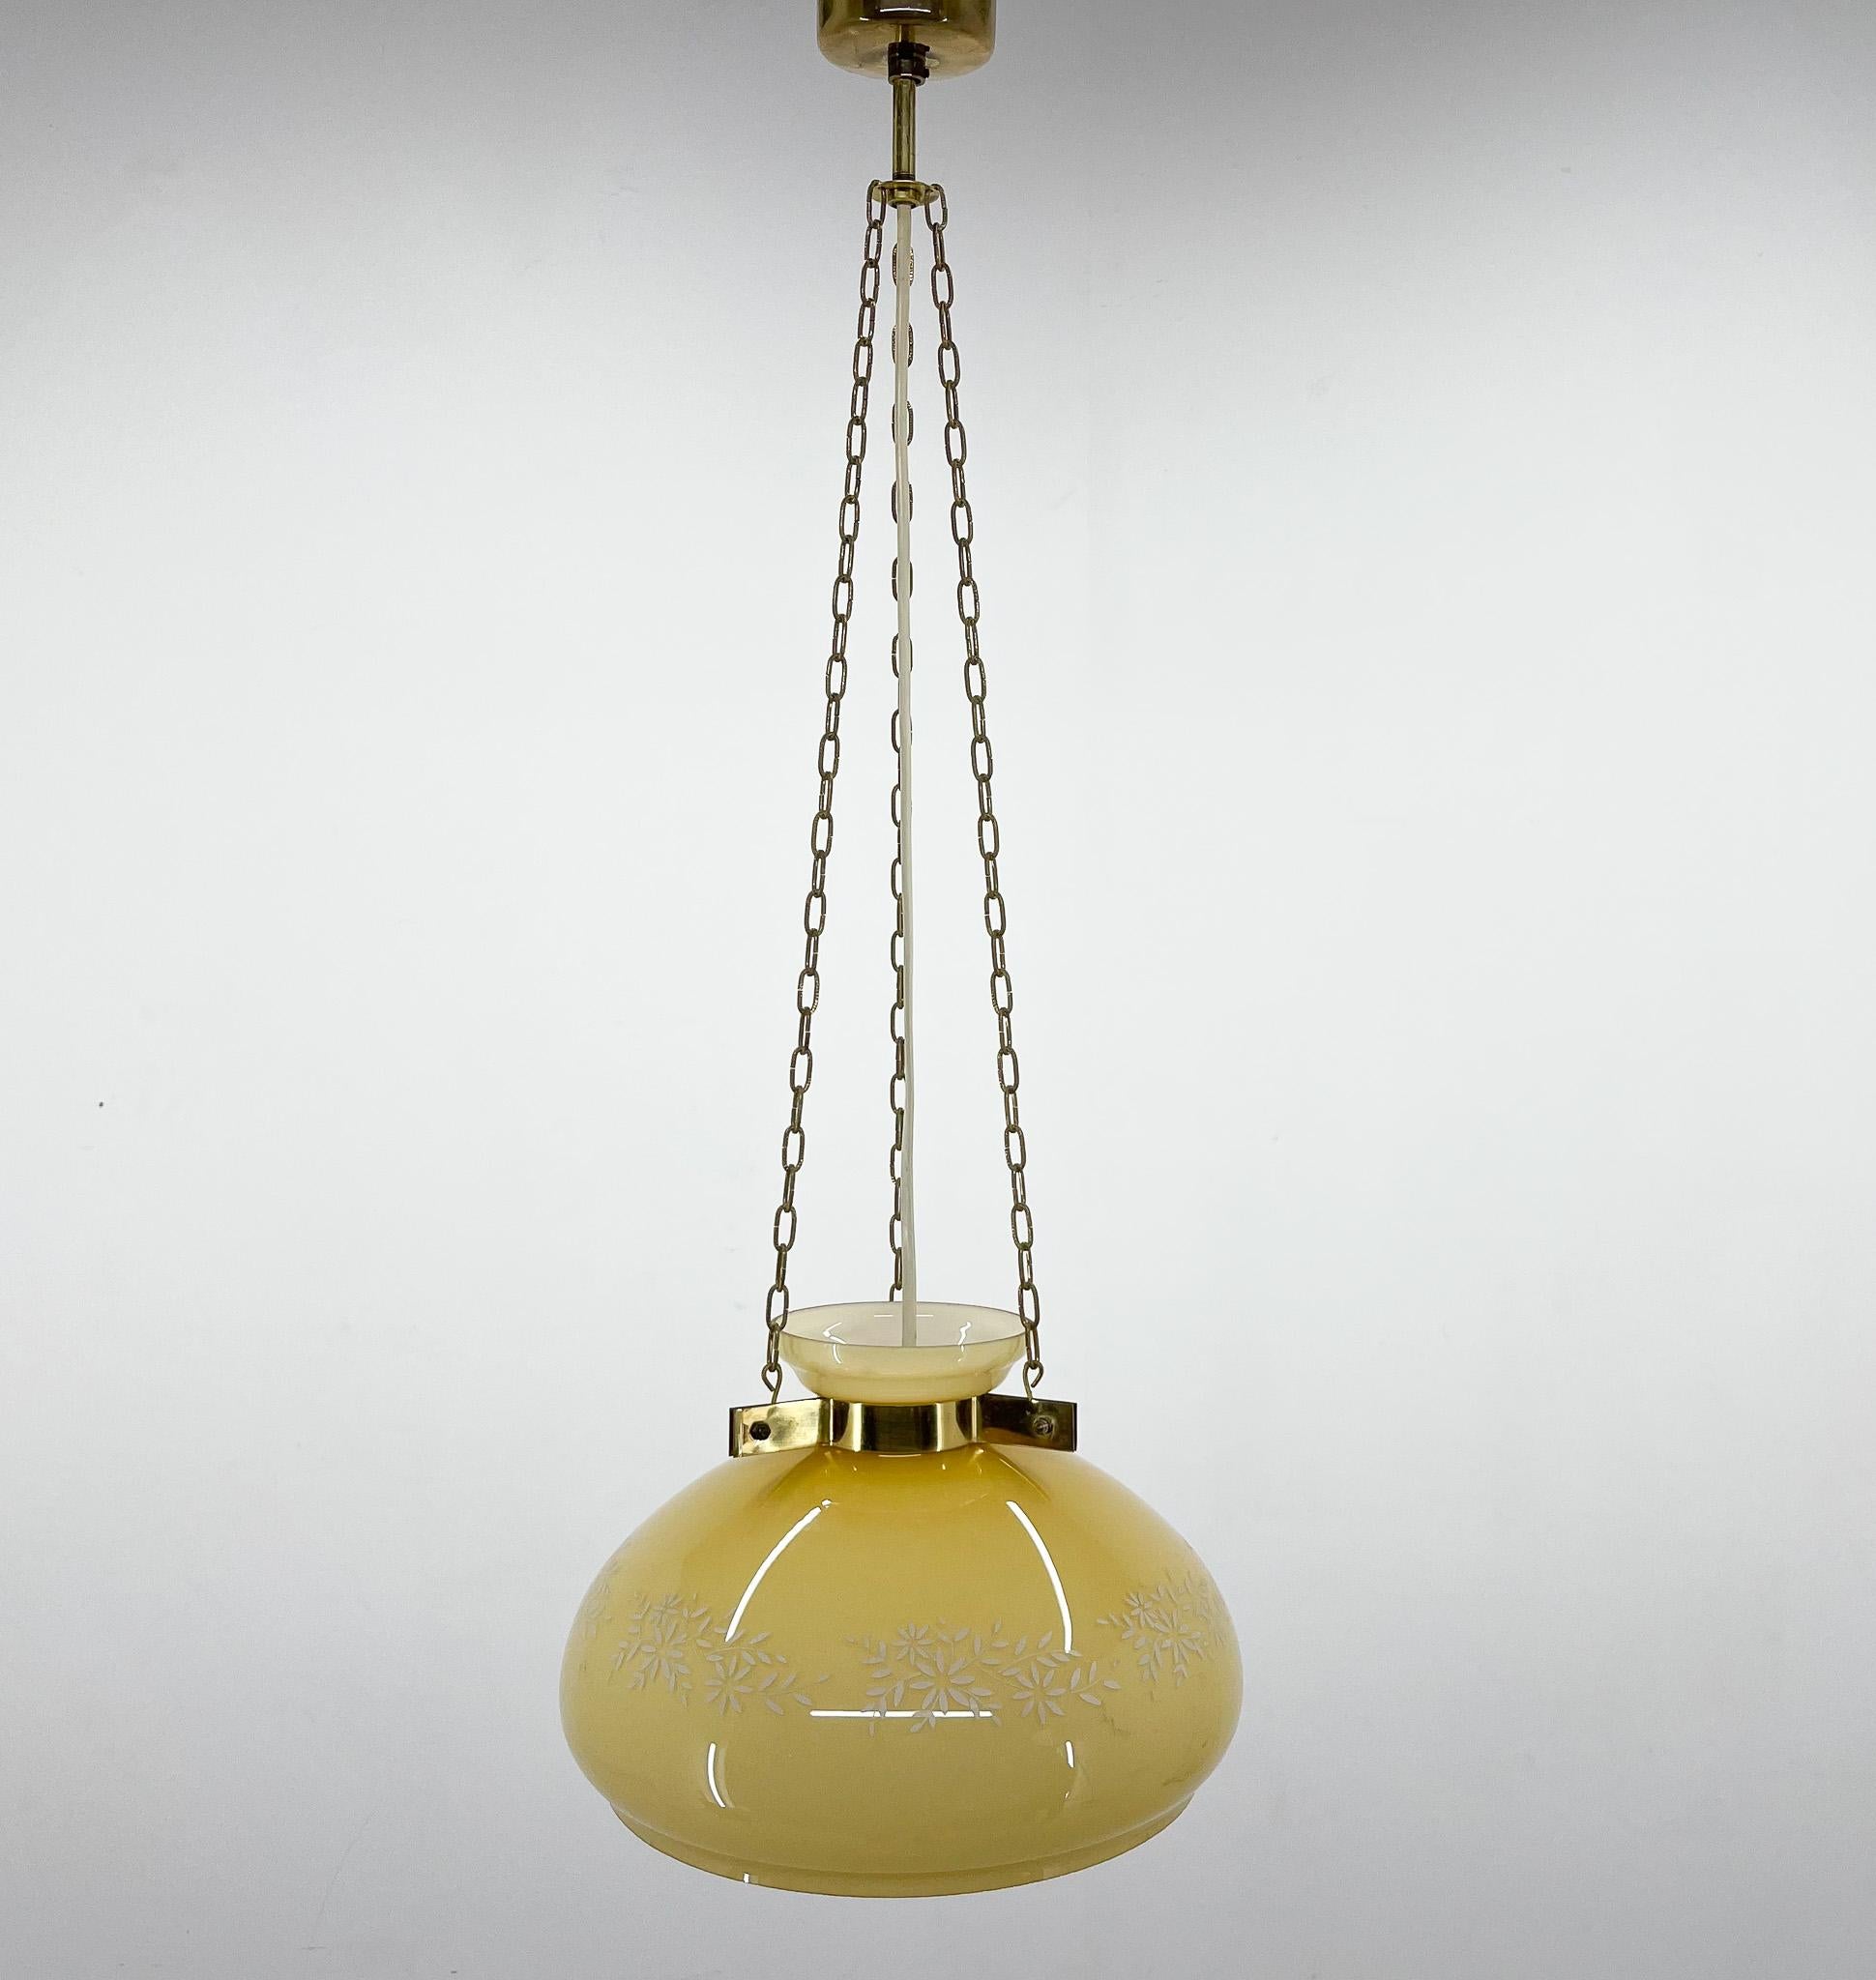 Beautiful mid-century pendant light, made of glass with painted flower pattern on brass chains. Bulbs: 1 x E25-E27.